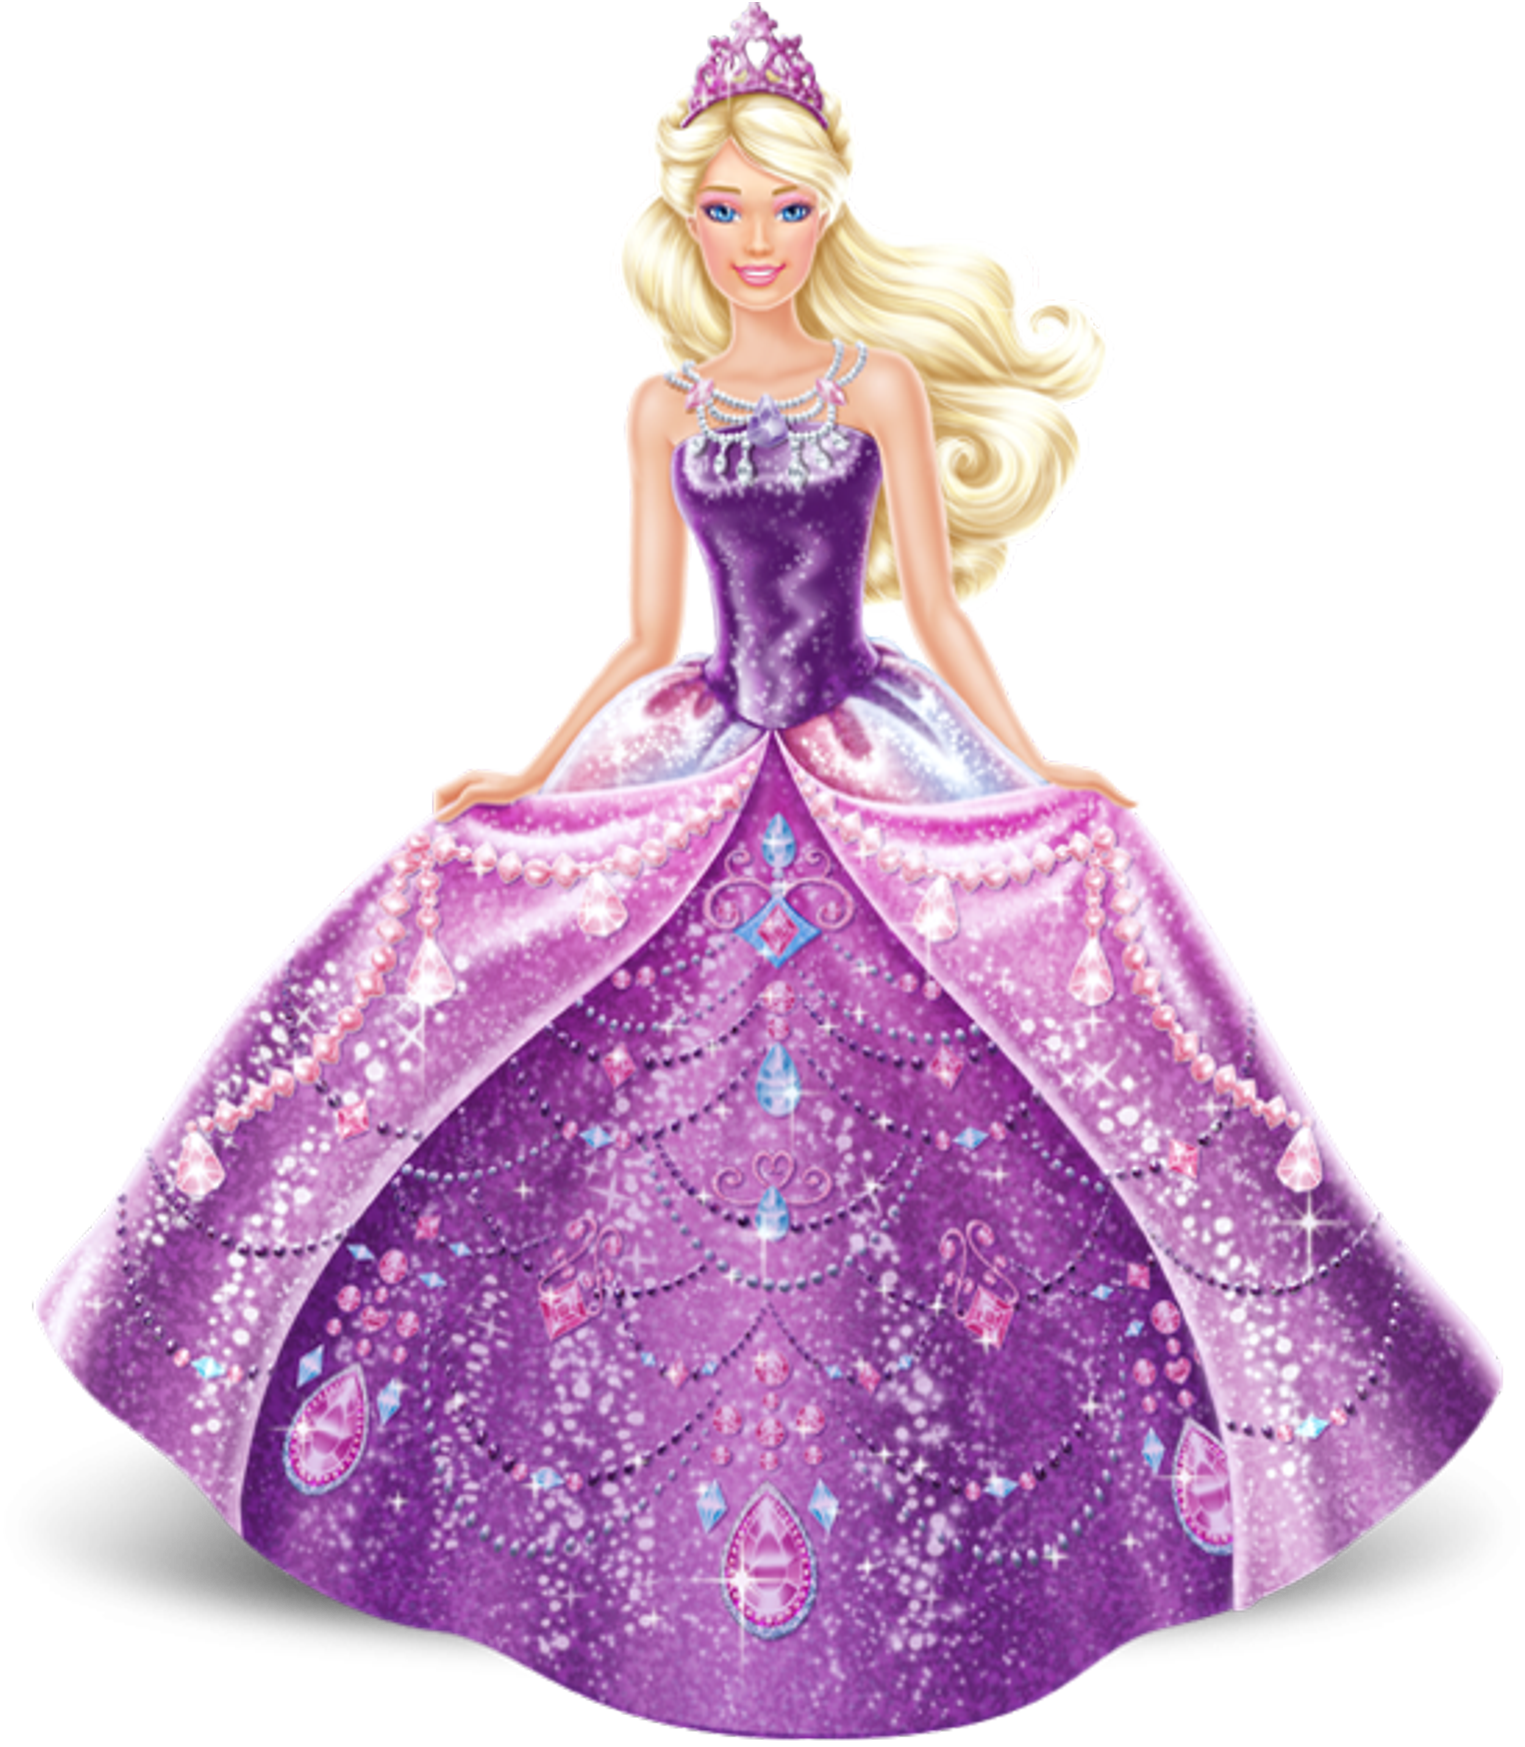 barbie png - Google Search